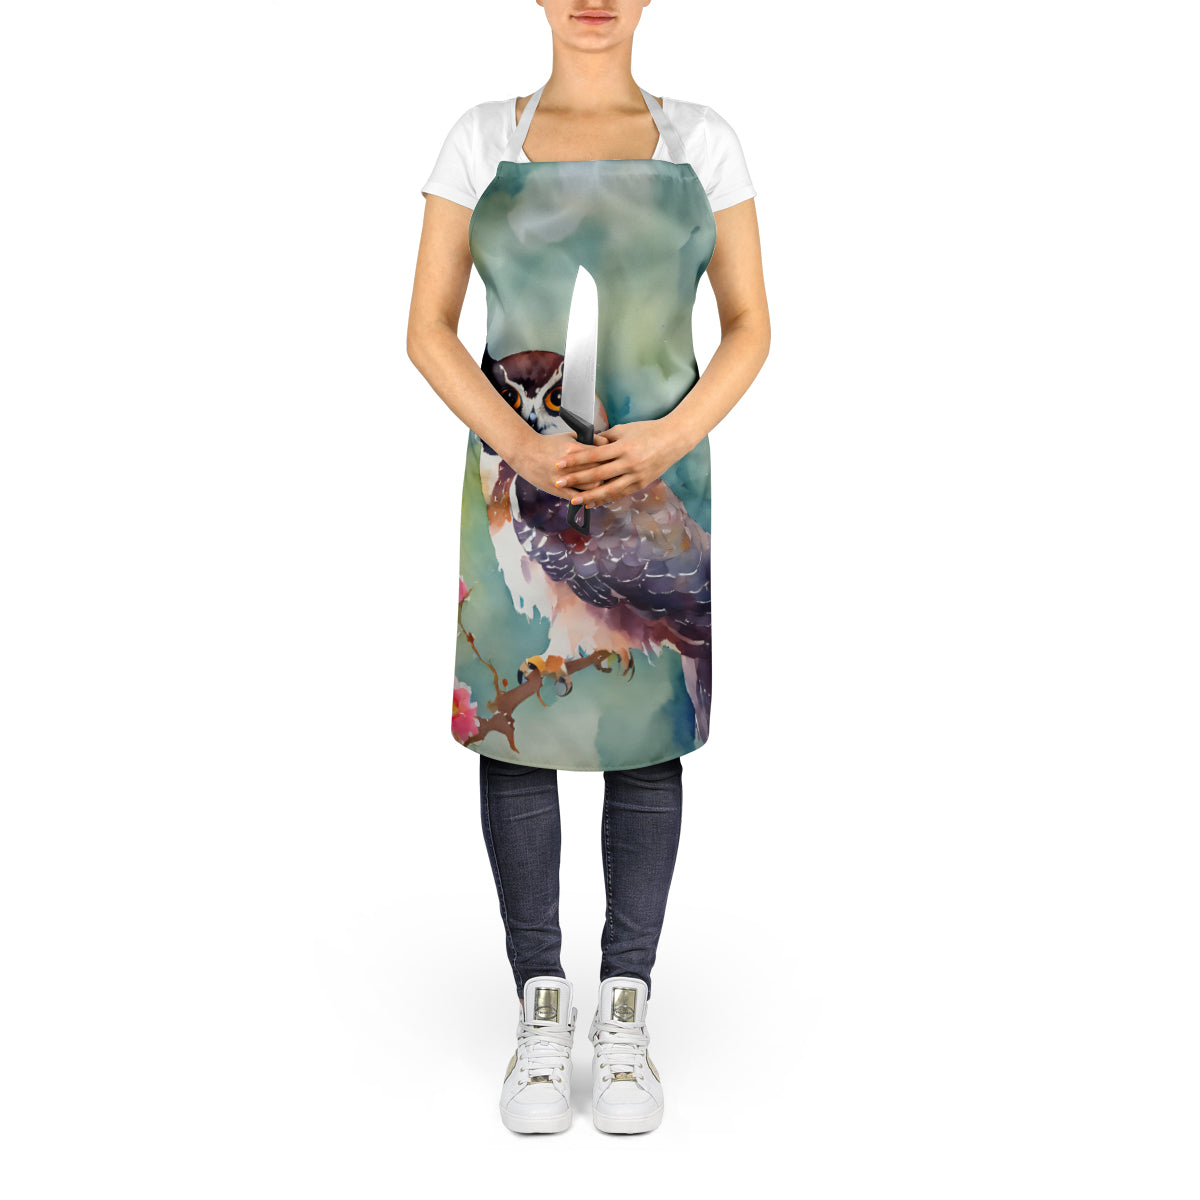 Spectacled Owl Apron